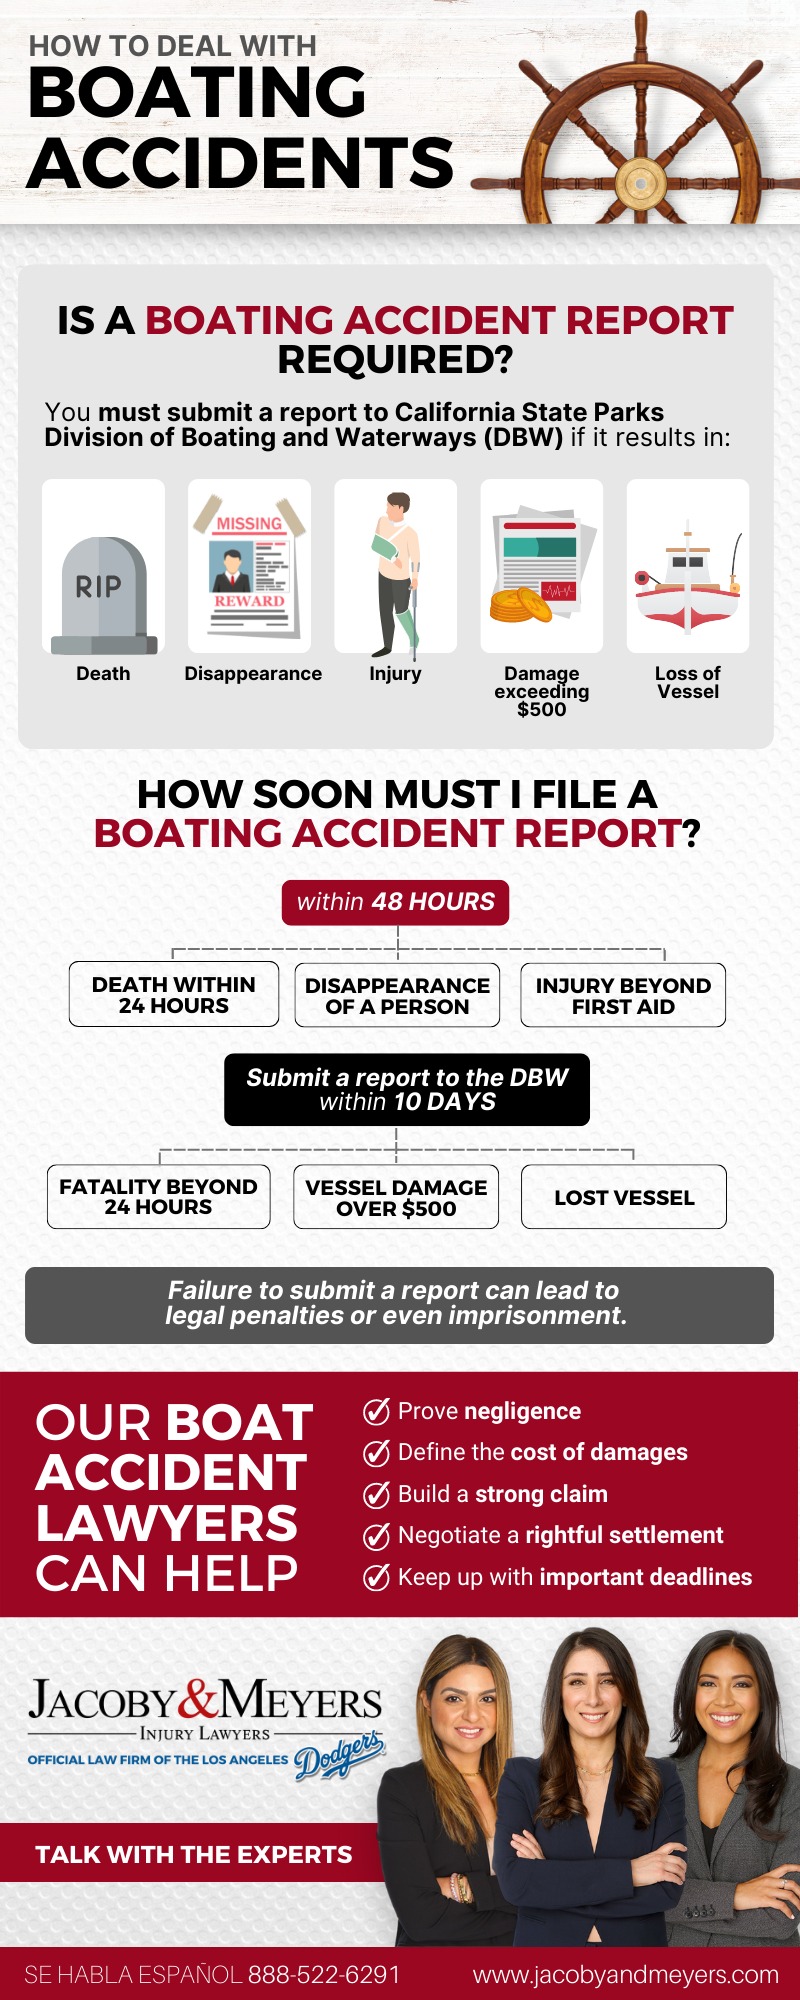 How to Deal with Boating Accidents Infographic